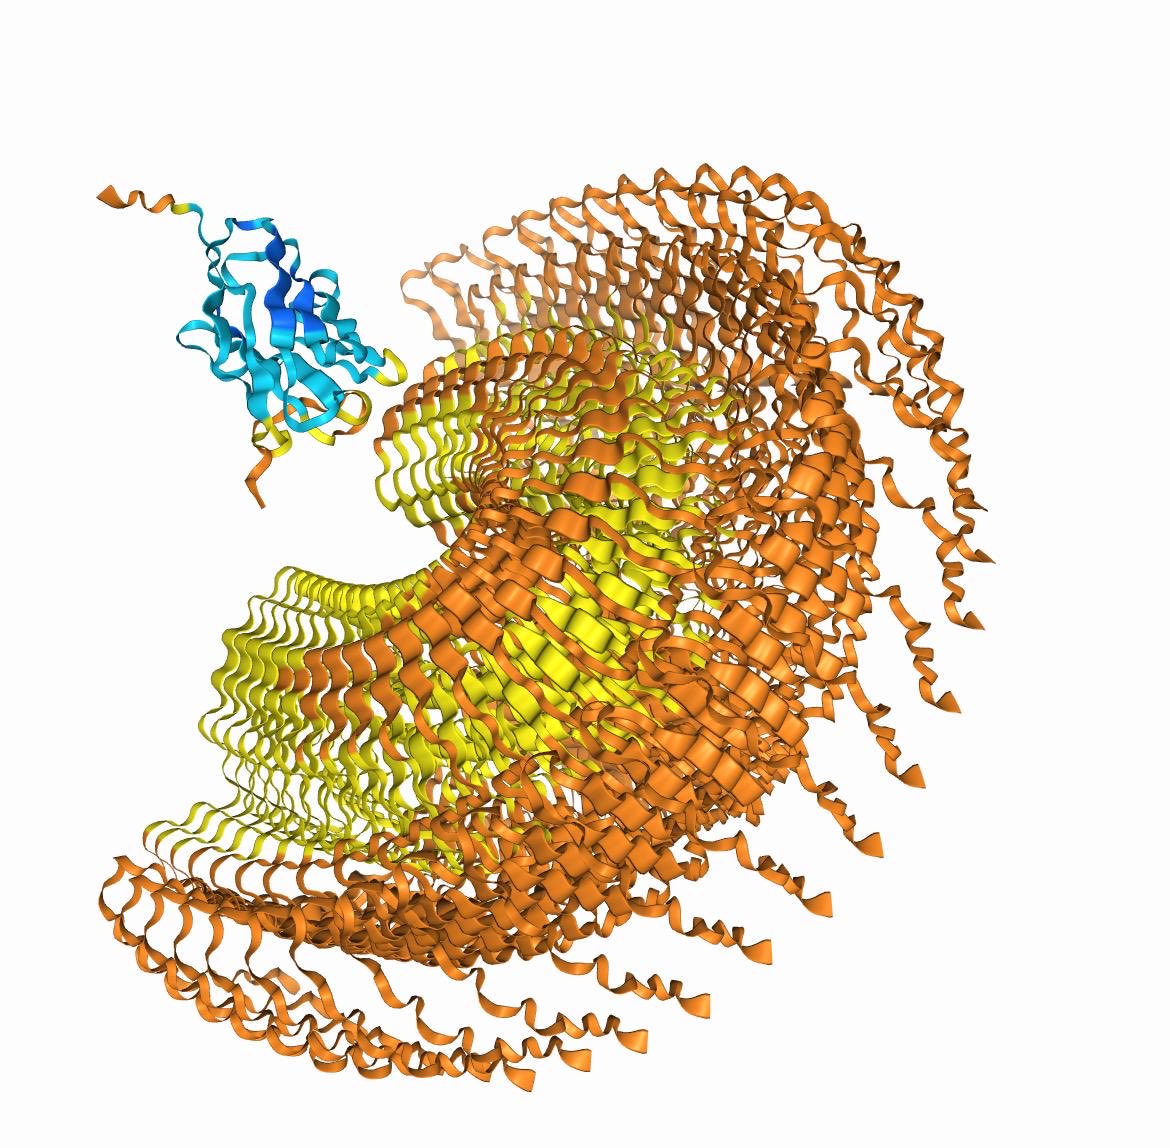 Not all of them Isma! This is the model for the interaction between an #asynuclein oligomer (30 #protein subunits) and an oligomer-specific nanobody according to #AlphaFold3. I would say it is not very realistic 😉